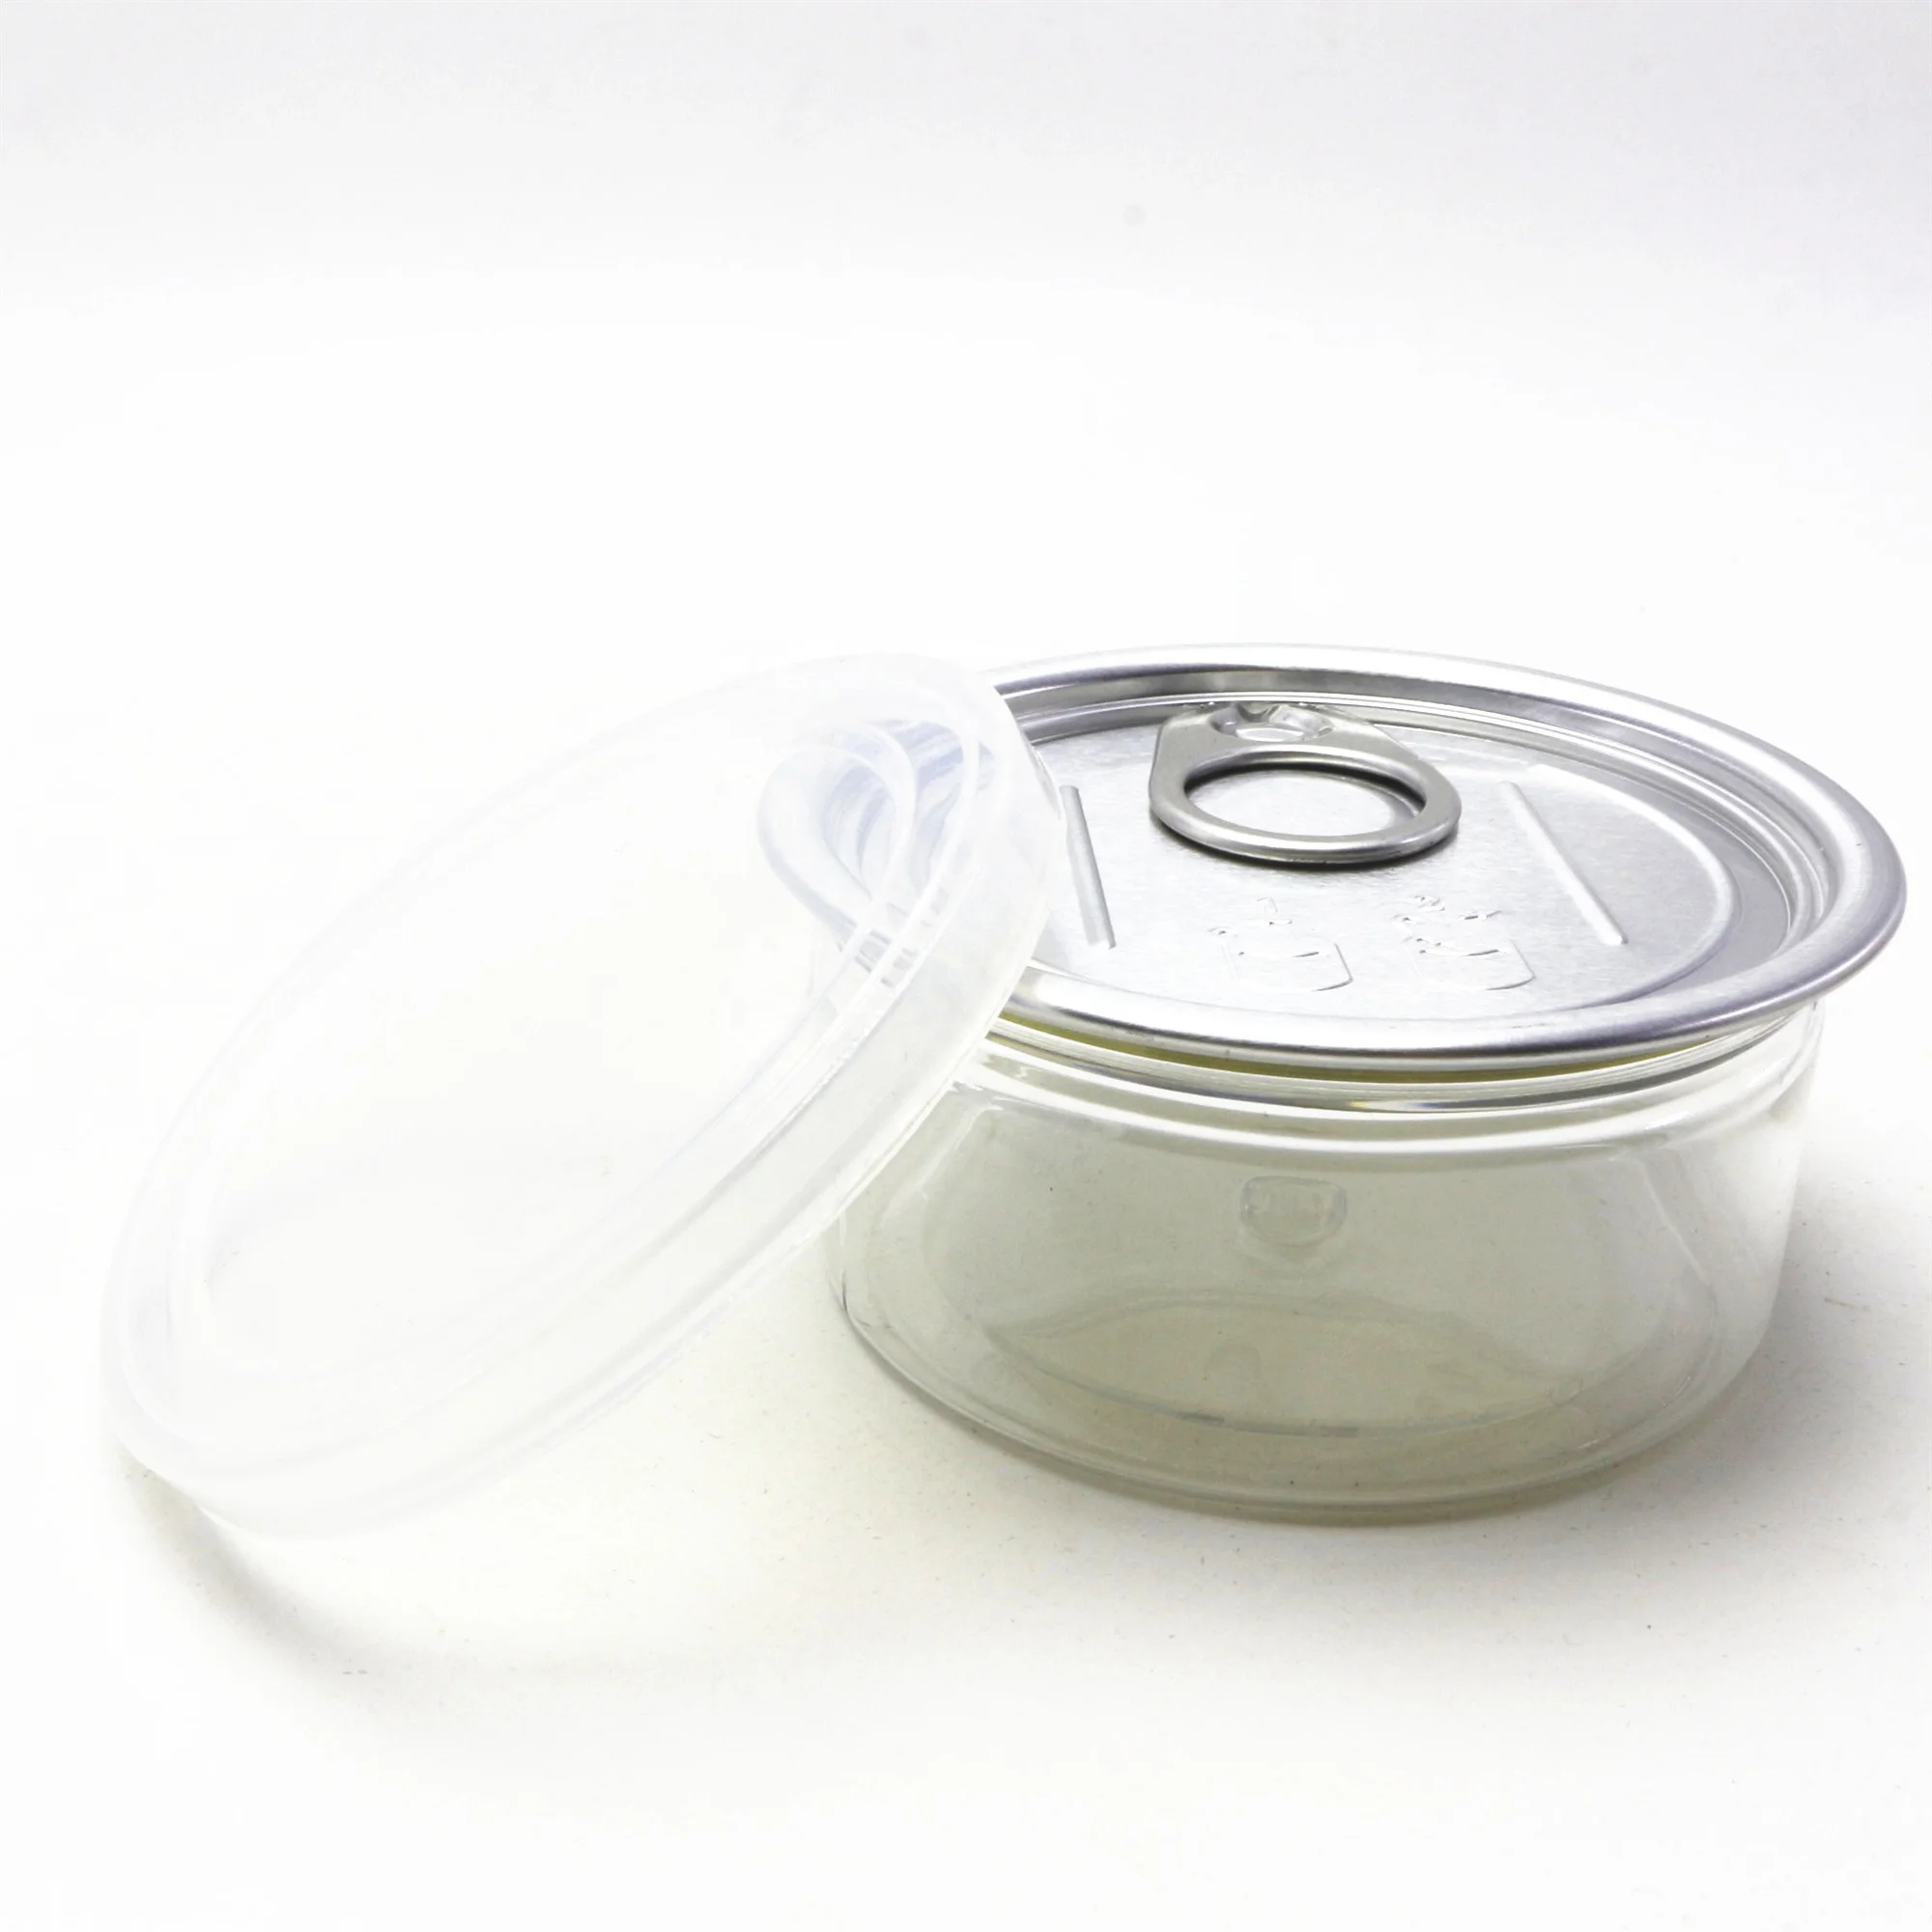 Pet Cans For Sale 100ml With Silver Aluminum Caps And Plastic Lids Tc 125k Buy Pet Cans For Sale 100ml 100ml With Silver Aluminum Caps Pet Clear Jars With Plastic Lids Product On Alibaba Com